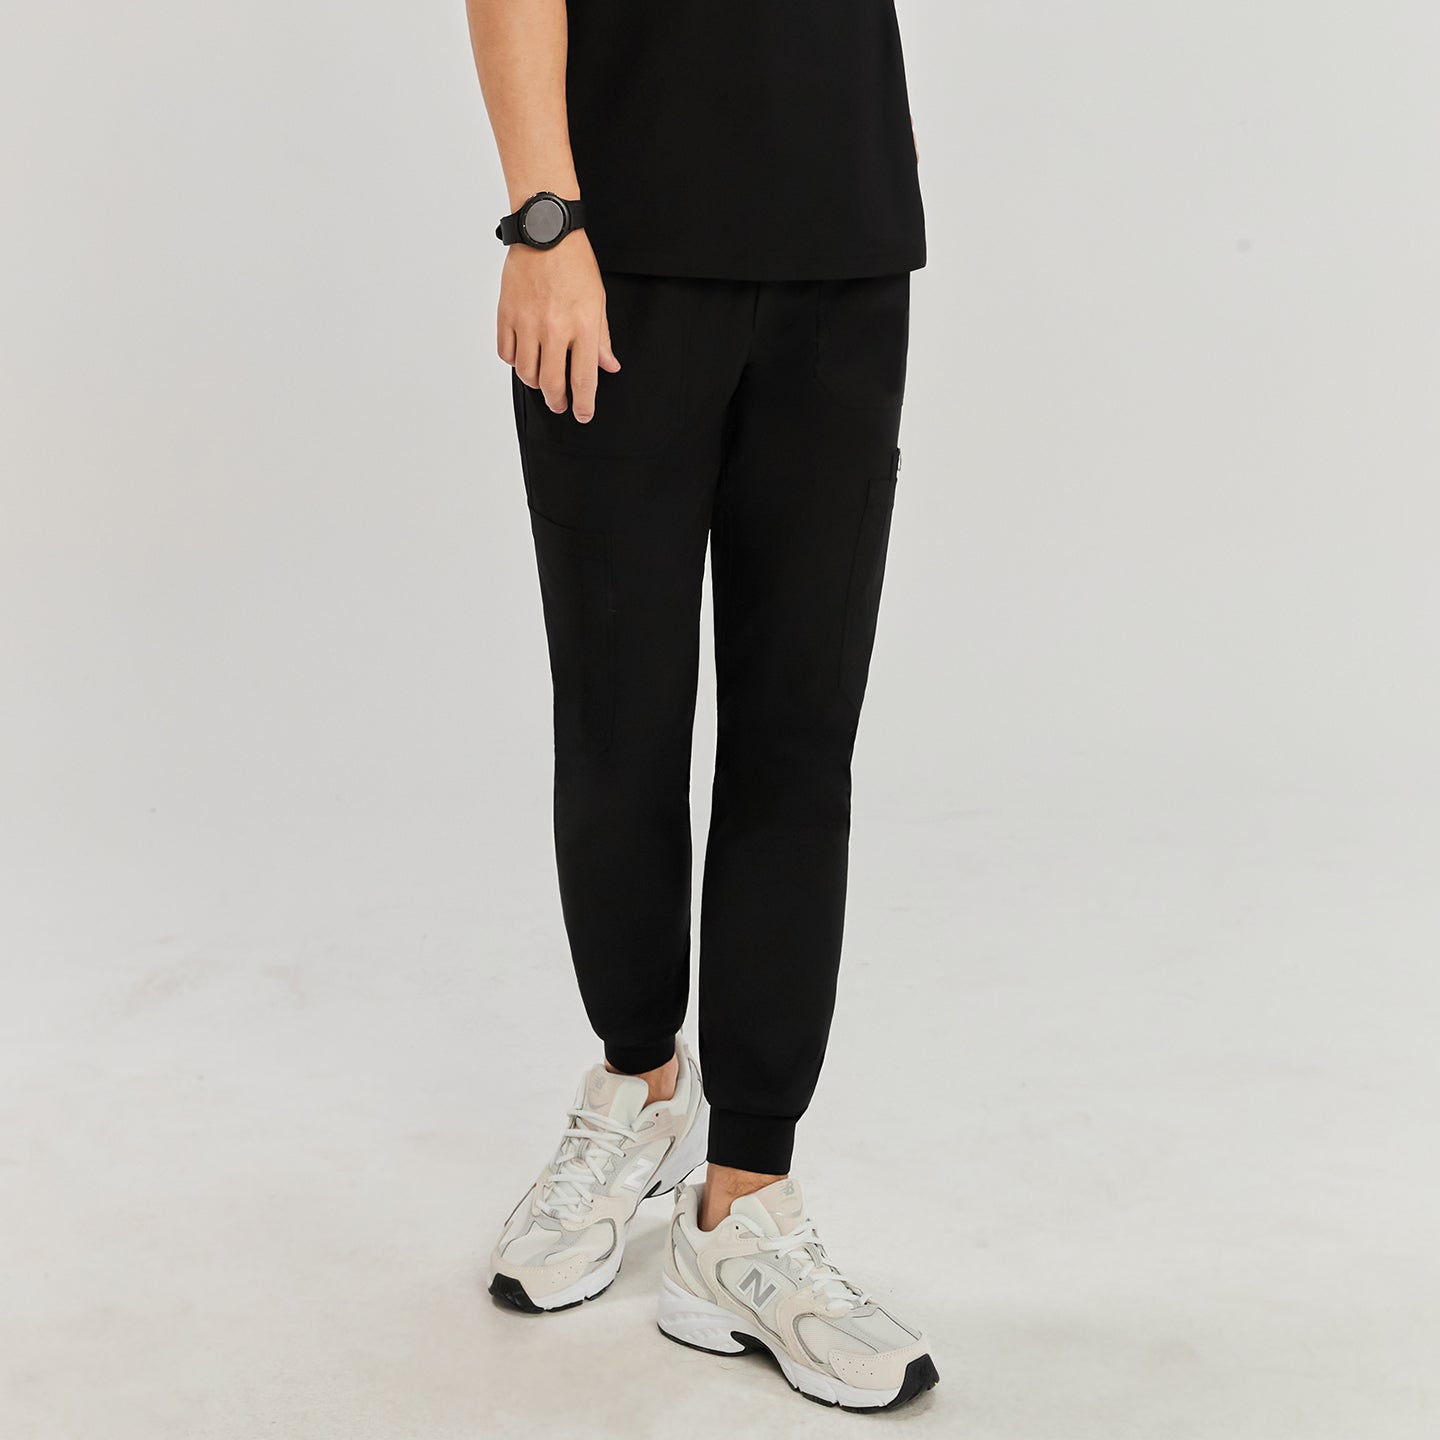 Model wearing jogger-style scrub pants with side pockets, shown in a relaxed stance with white sneakers.Eco Black